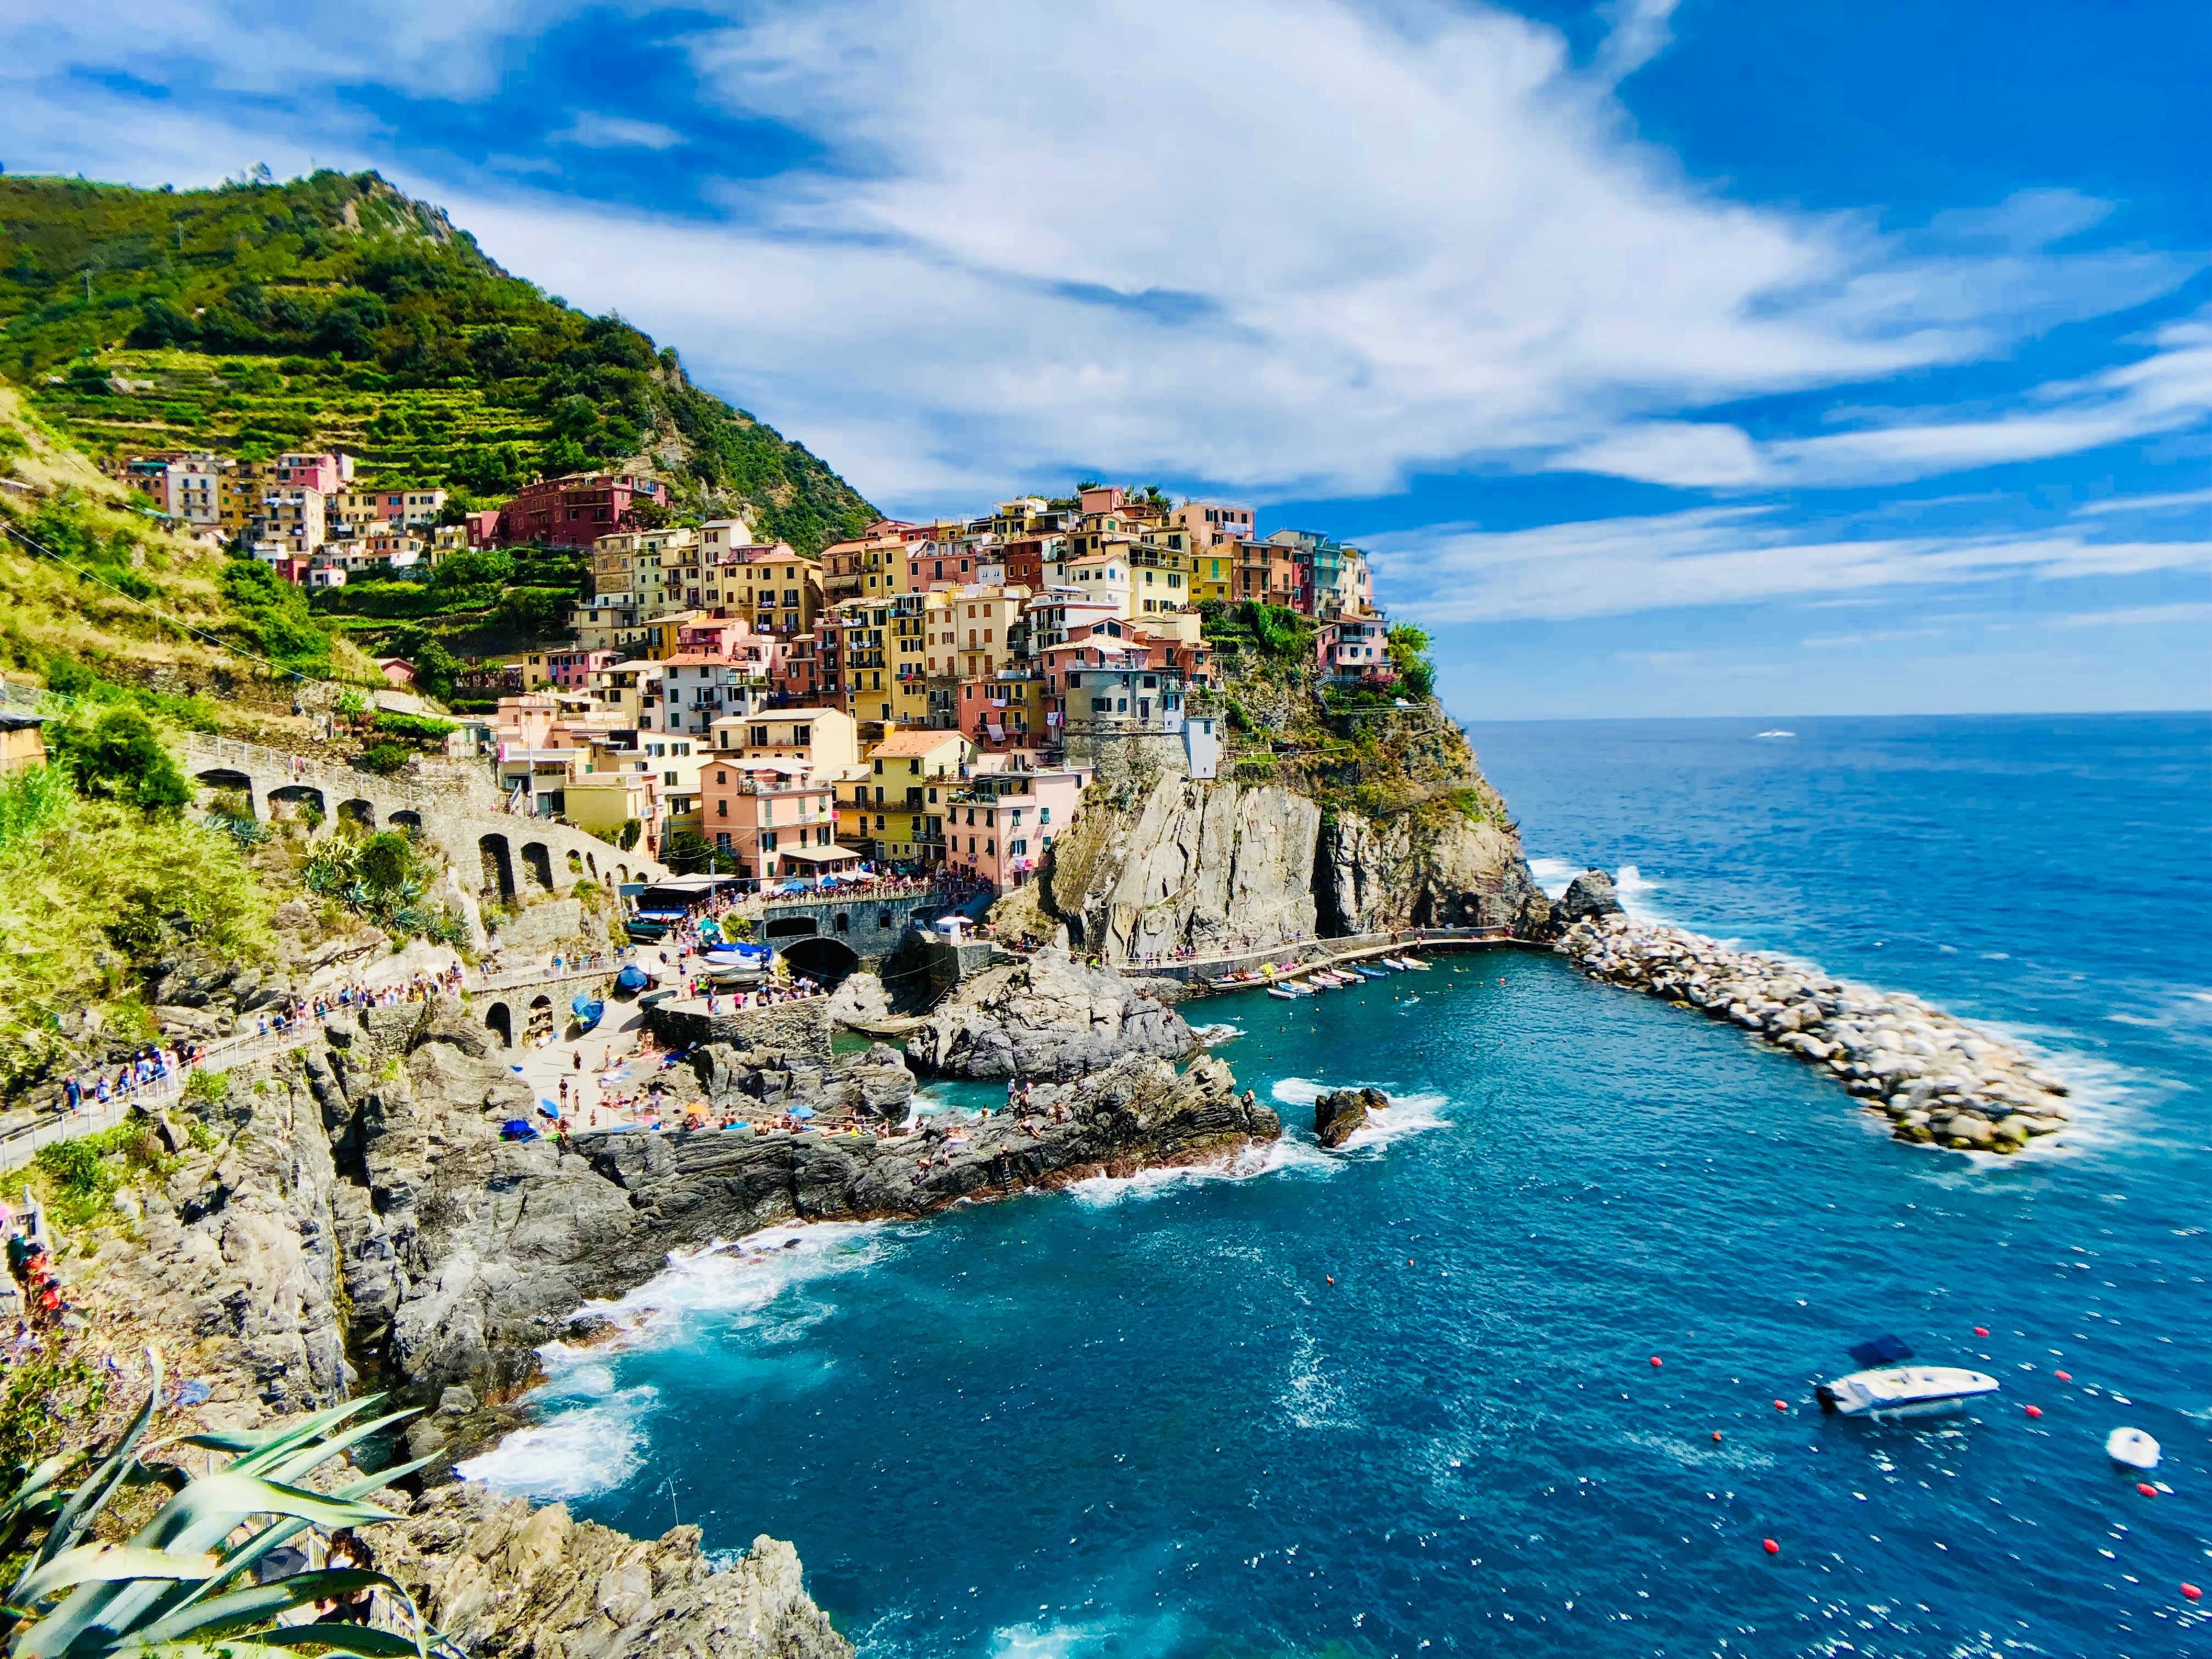 A picture of a village on the coast of the Cinique Terre area in Italy